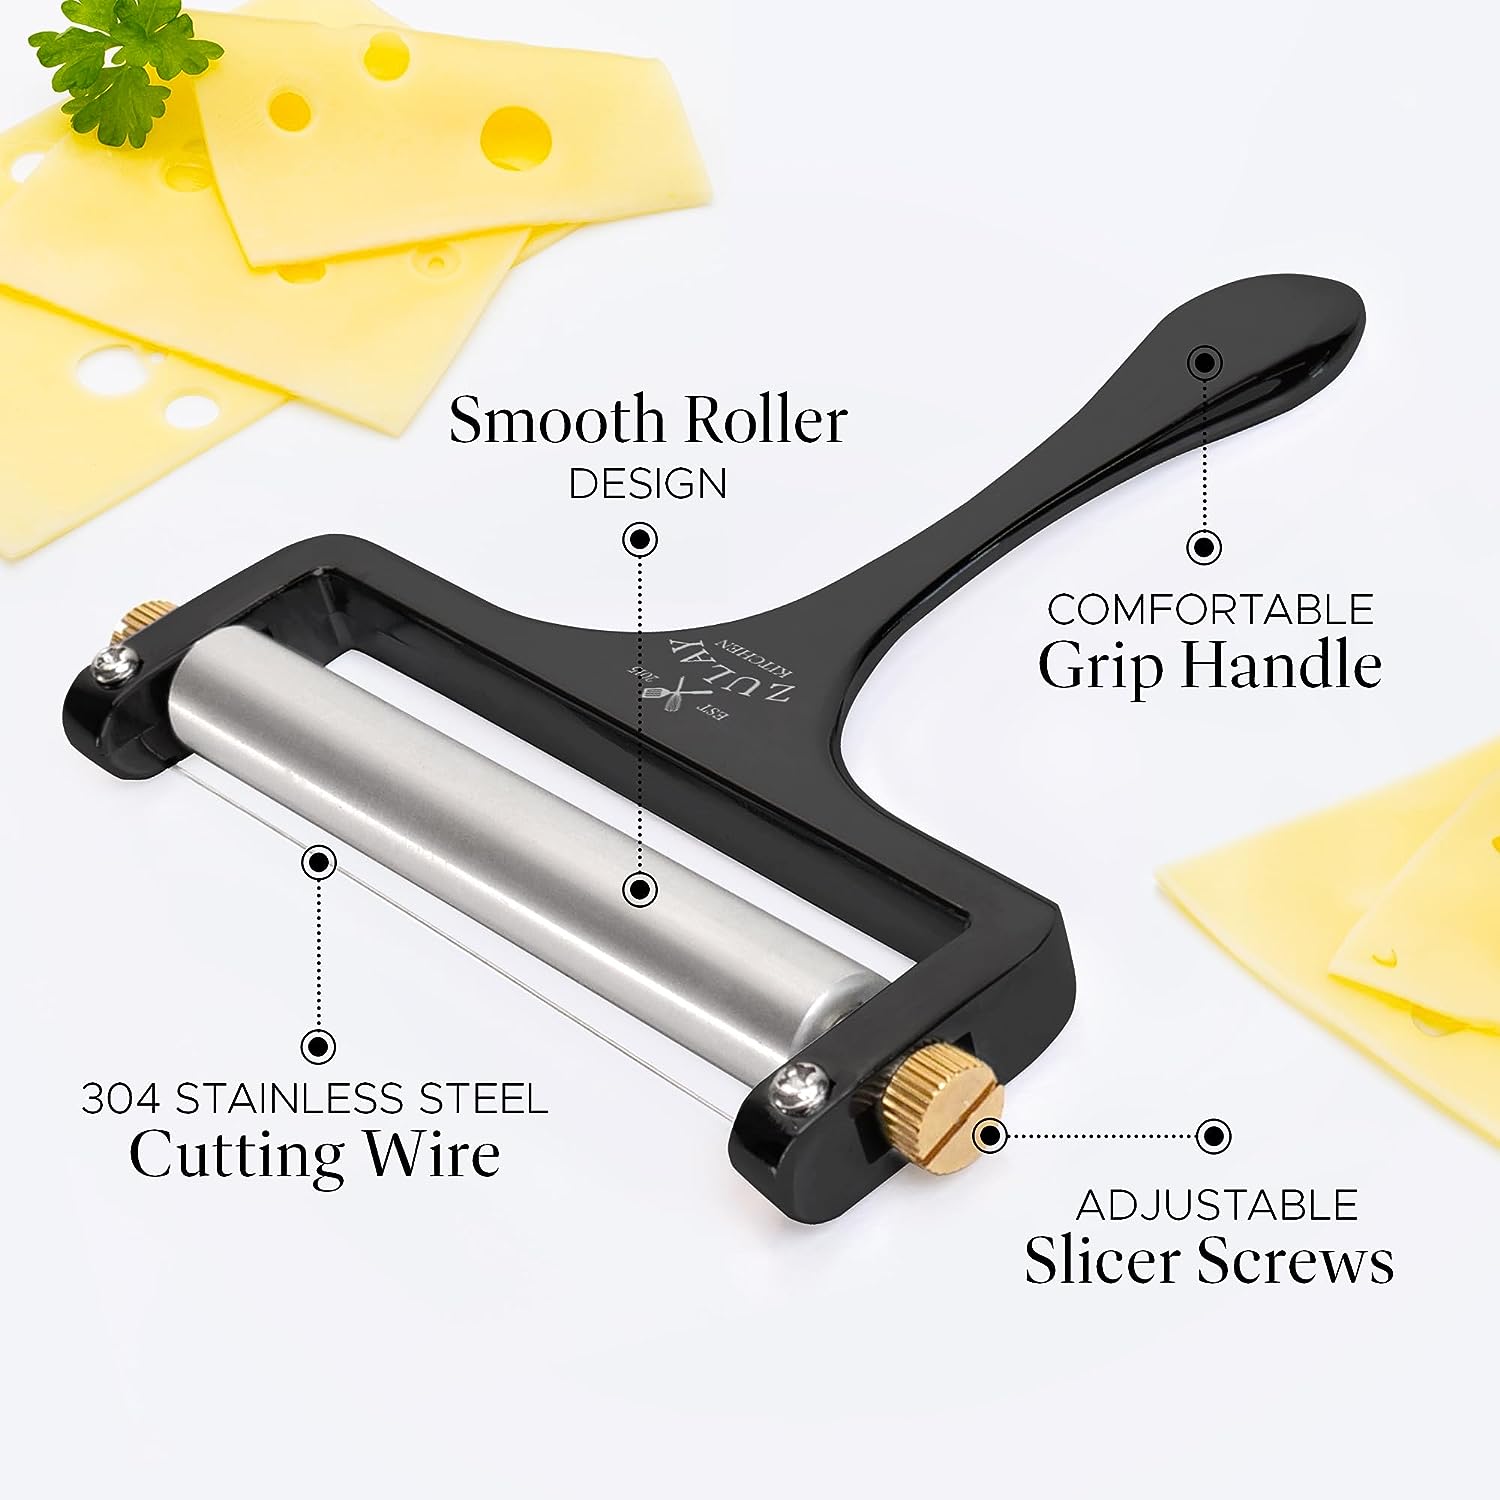 2-in-1 Adjustable Cheese Slicer